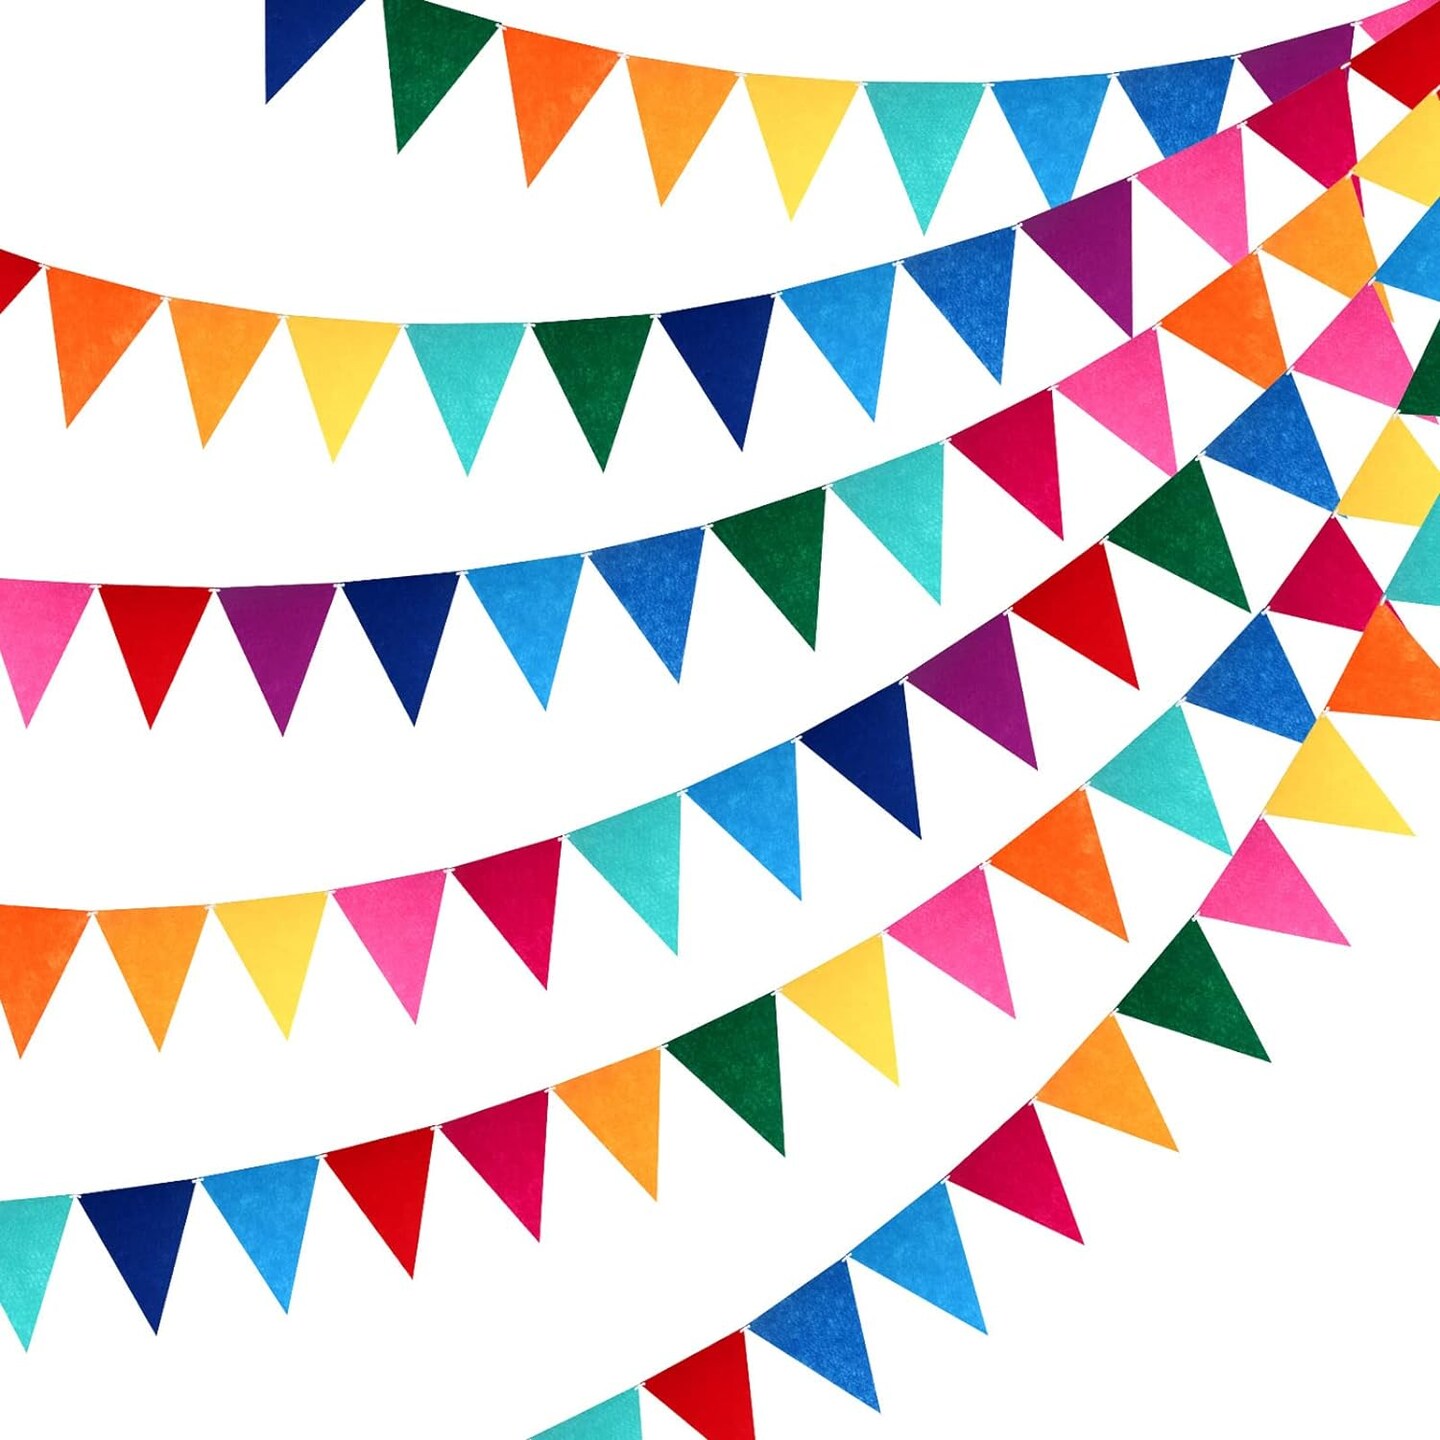 6 Sets Rainbow Pennant Banner Garland Multicolor Bunting Felt Fabric Pennant Banners Flags Rainbow Bunting for Birthday Party Festival Decorations (Rainbow Colors)